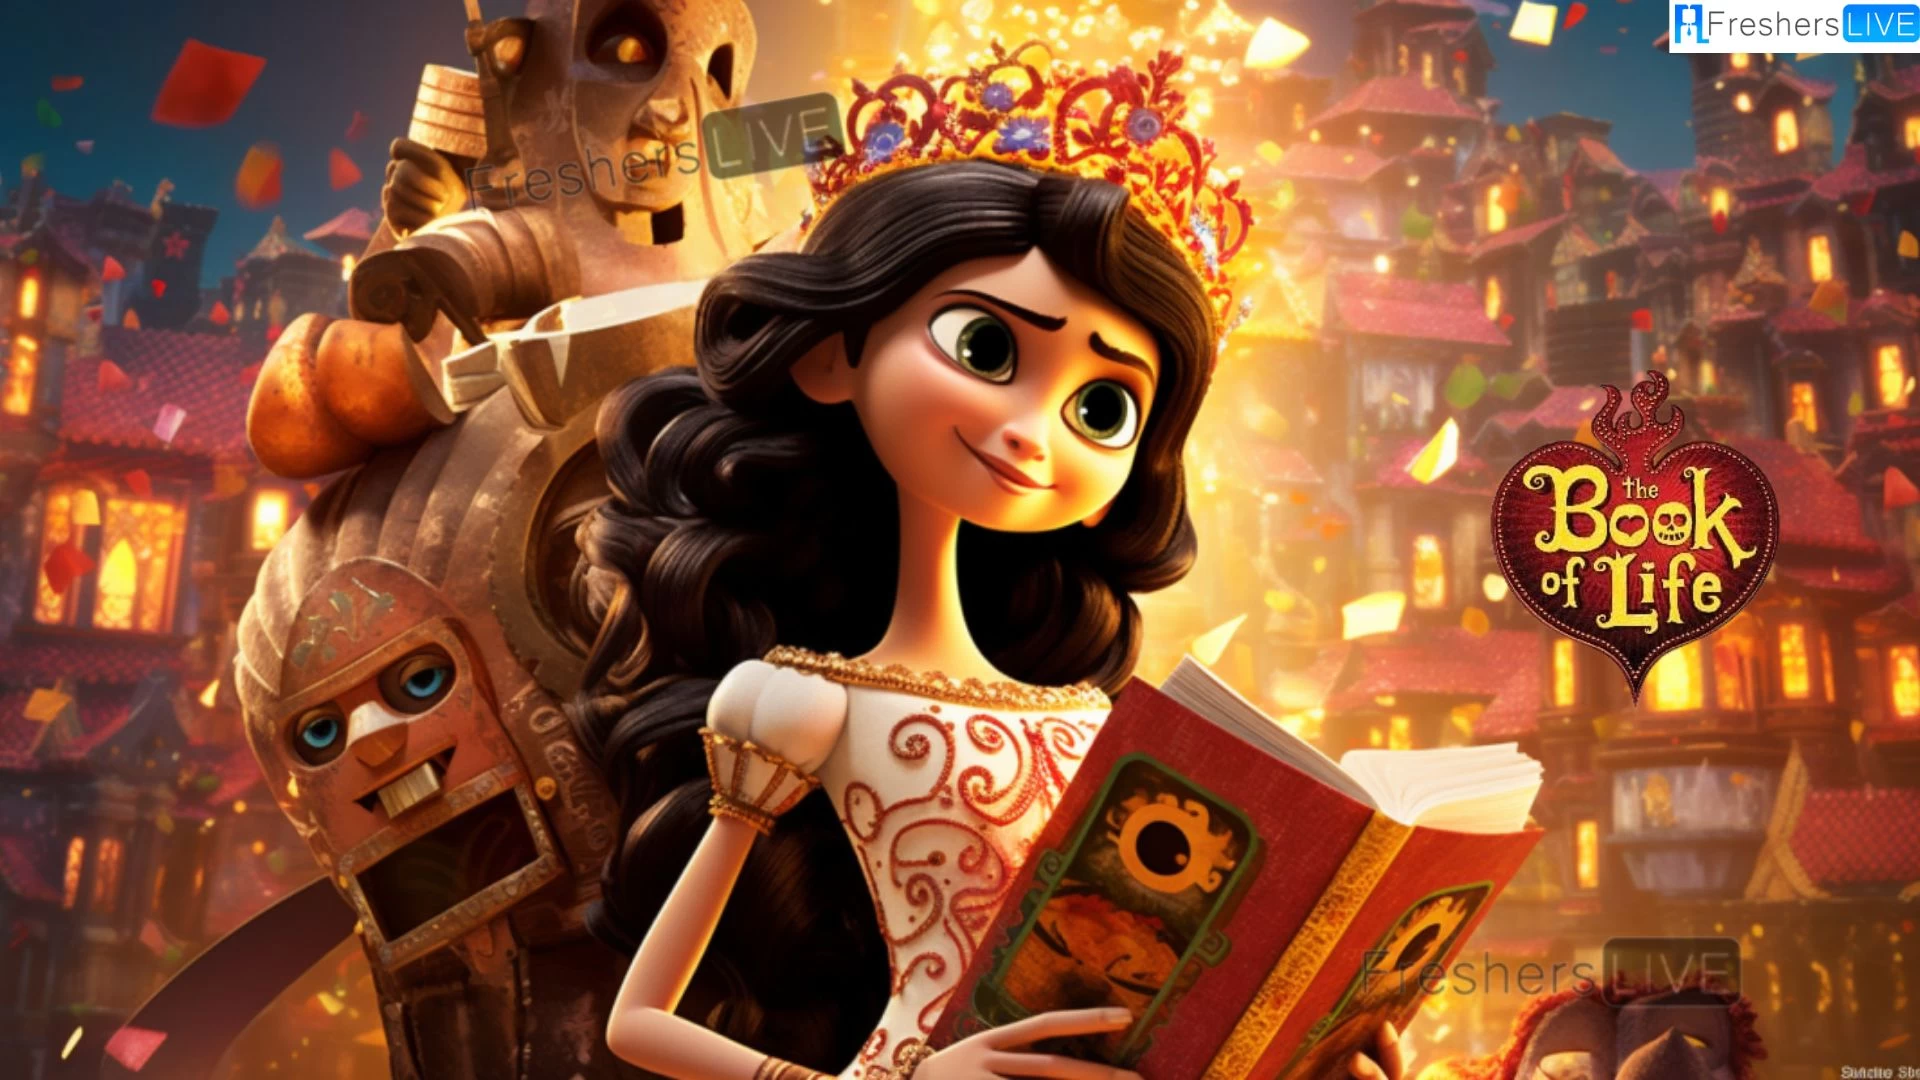 Will There Be a Book of Life 2? When is The Book of Life 2 Coming Out? The Book of Life 2 Release Date 2023? Is The Book of Life 2 Cancelled?